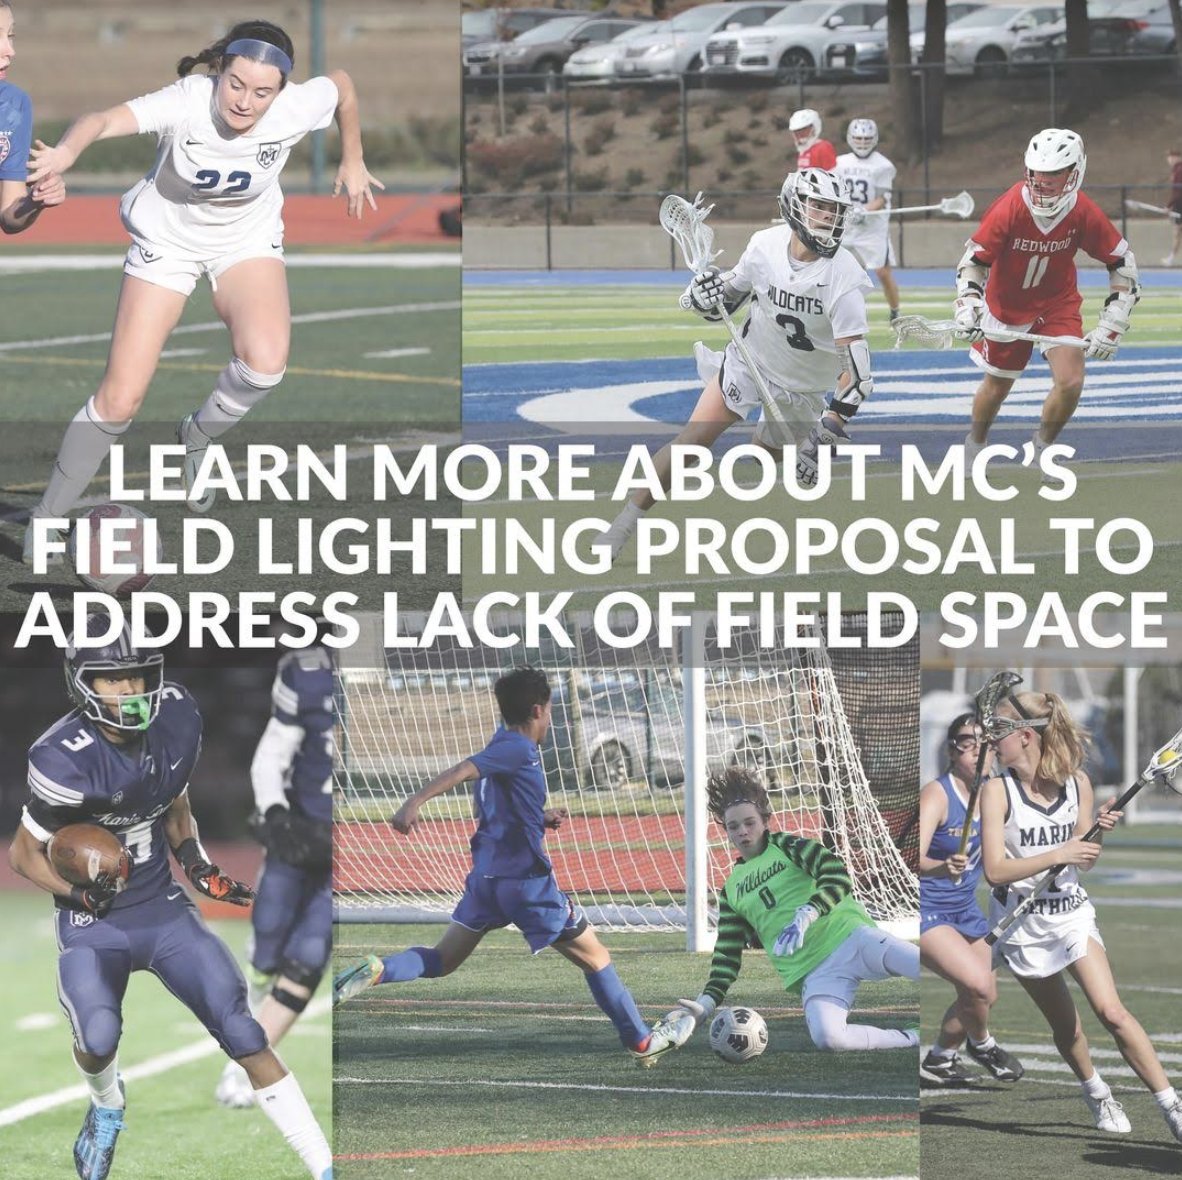 MC's new proposal for field lighting responds to the need for campus field space. The demand for field space has steadily risen among our student athletes, especially with the growth of our female teams. You can learn more about our proposed solution at: marincatholic.org/fieldlights